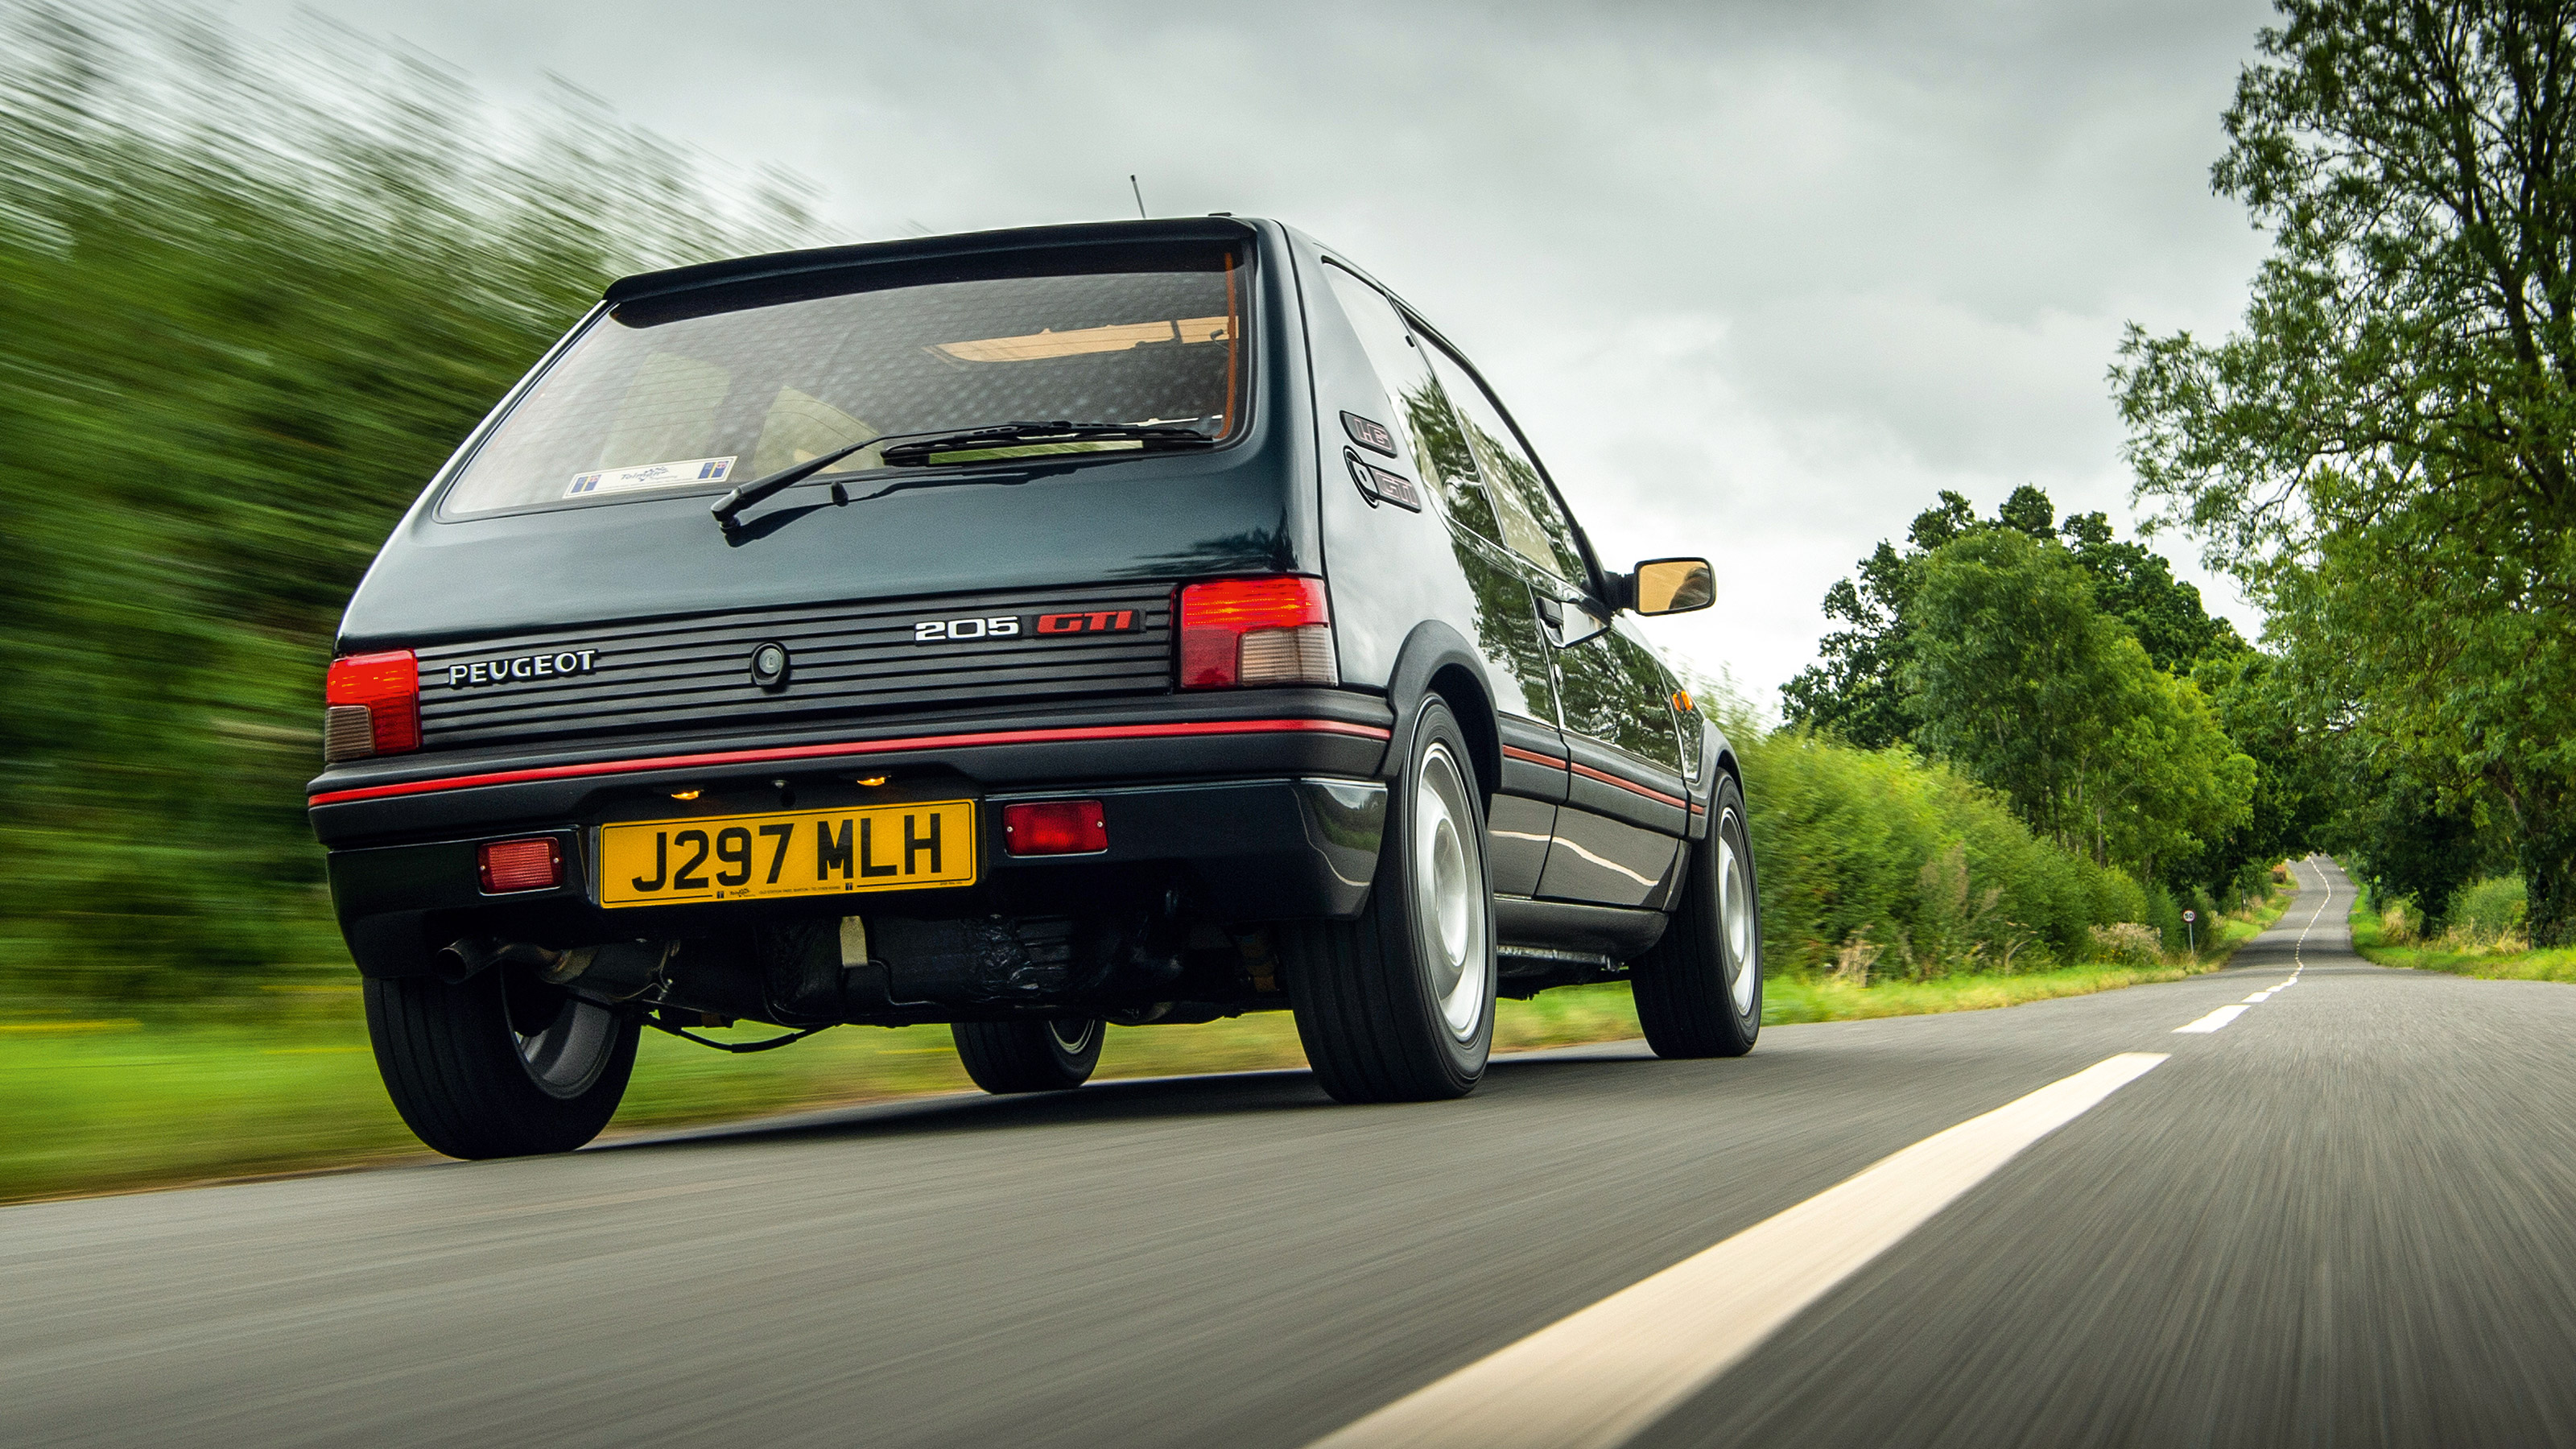 Tolman Has Created The 200 HP Peugeot 205 GTI Of Your Dreams